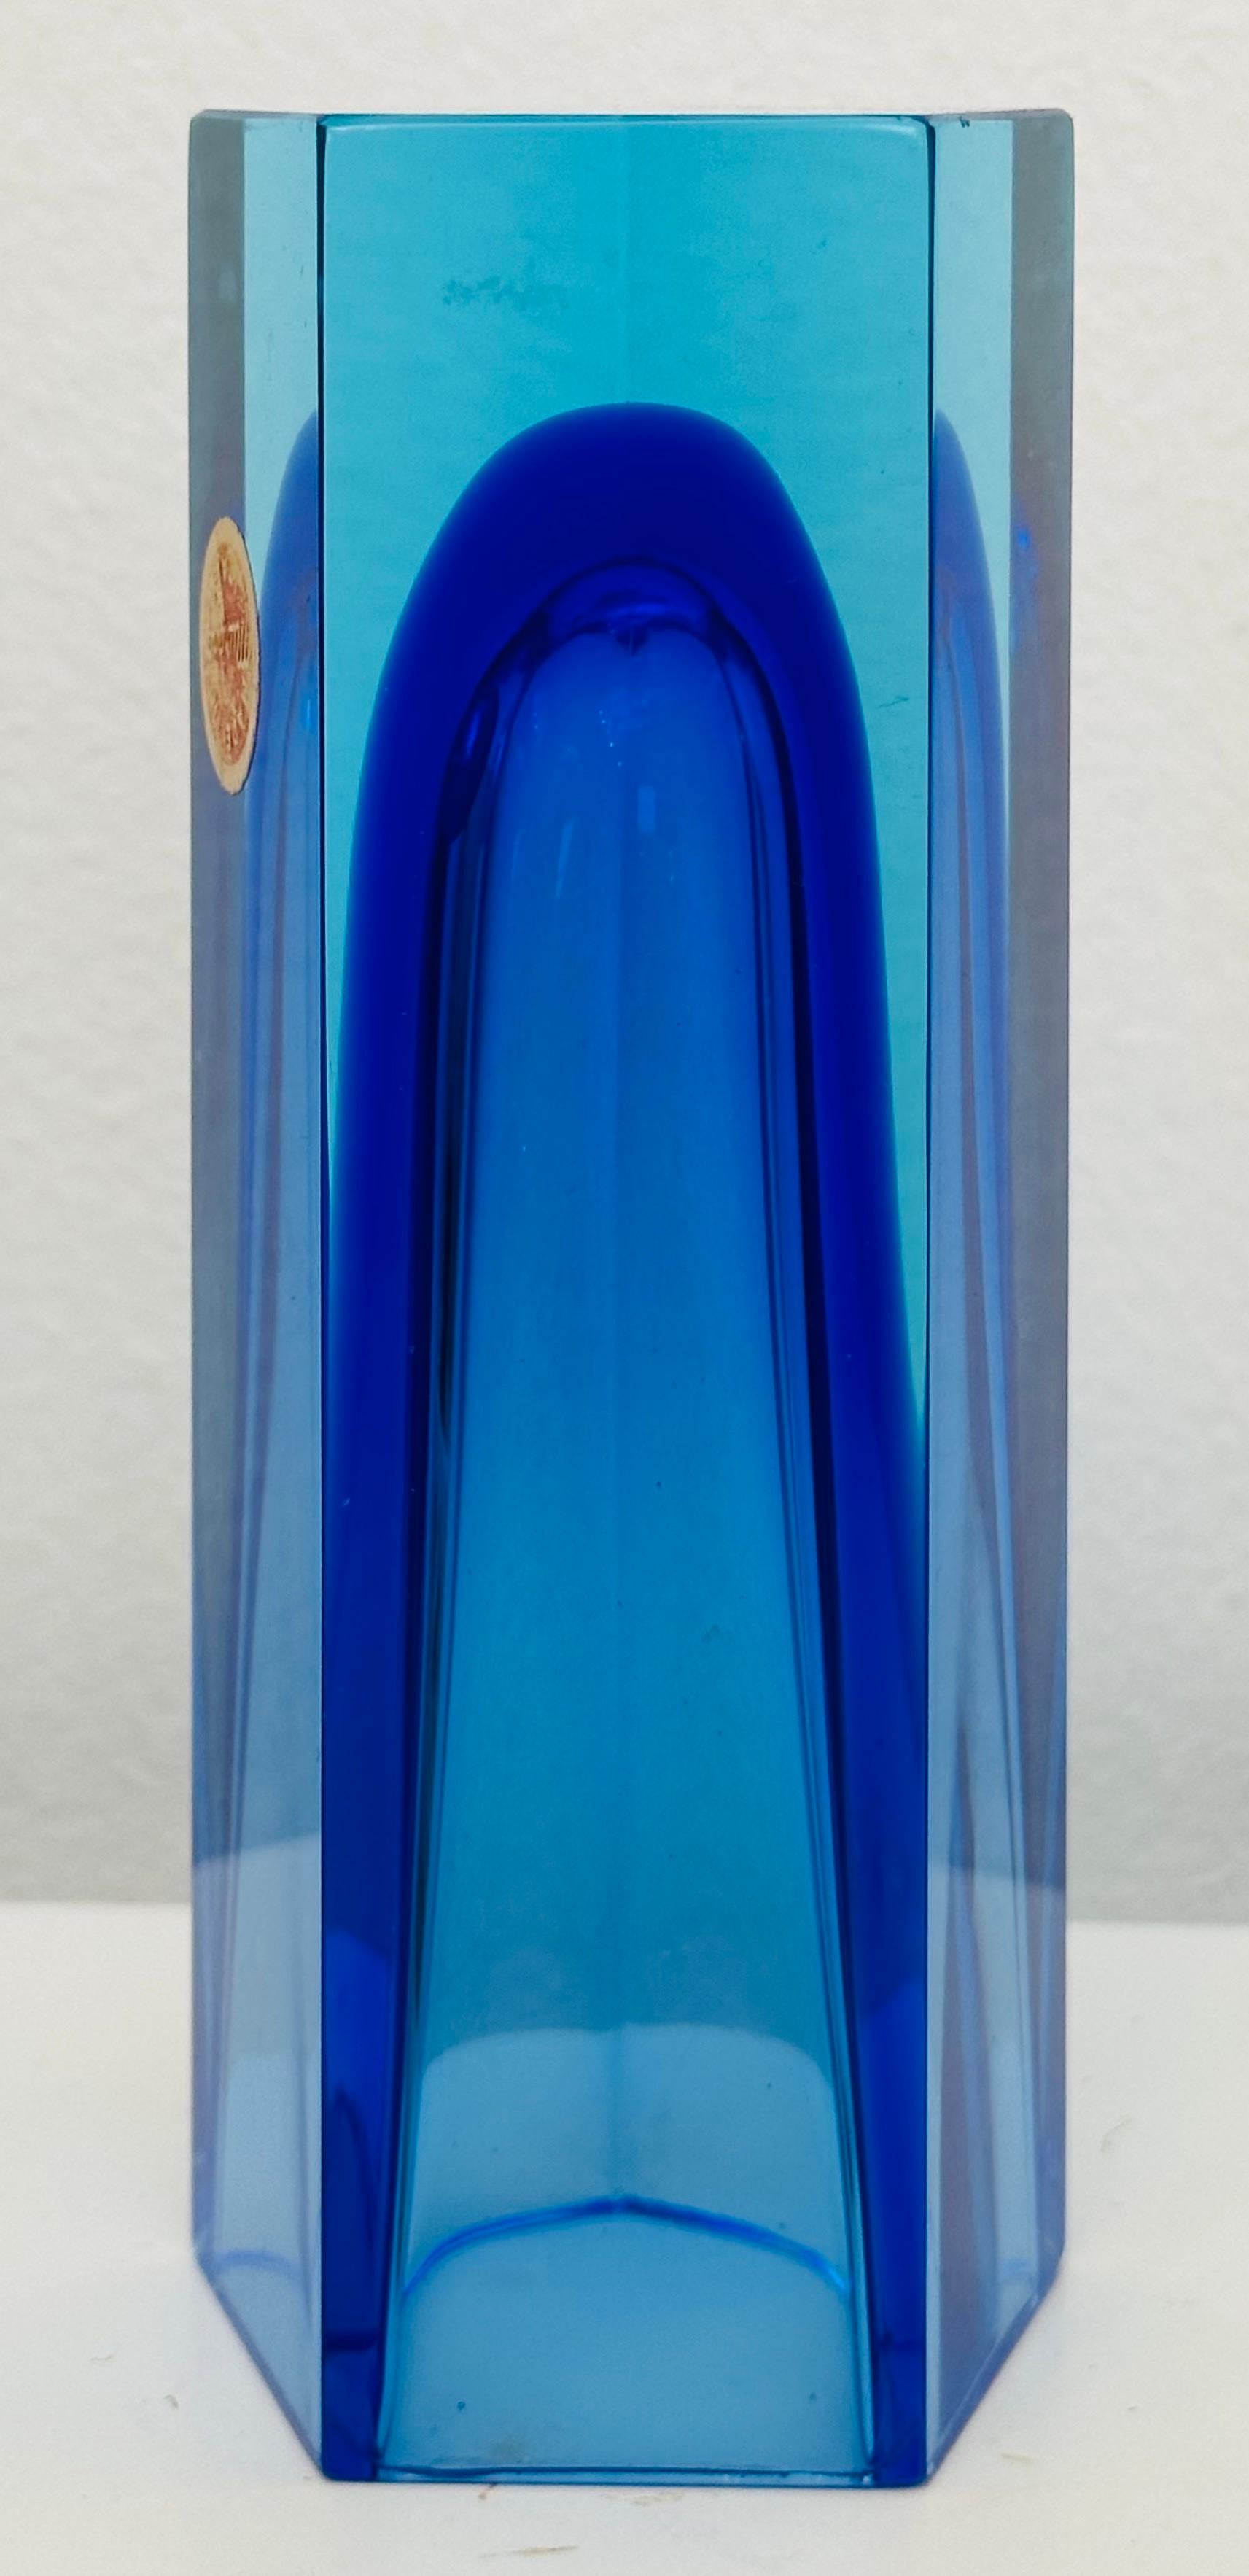 Small 1970s Mid Century Italian Murano Blue & Turquoise Sommerso Glass Vase For Sale 4